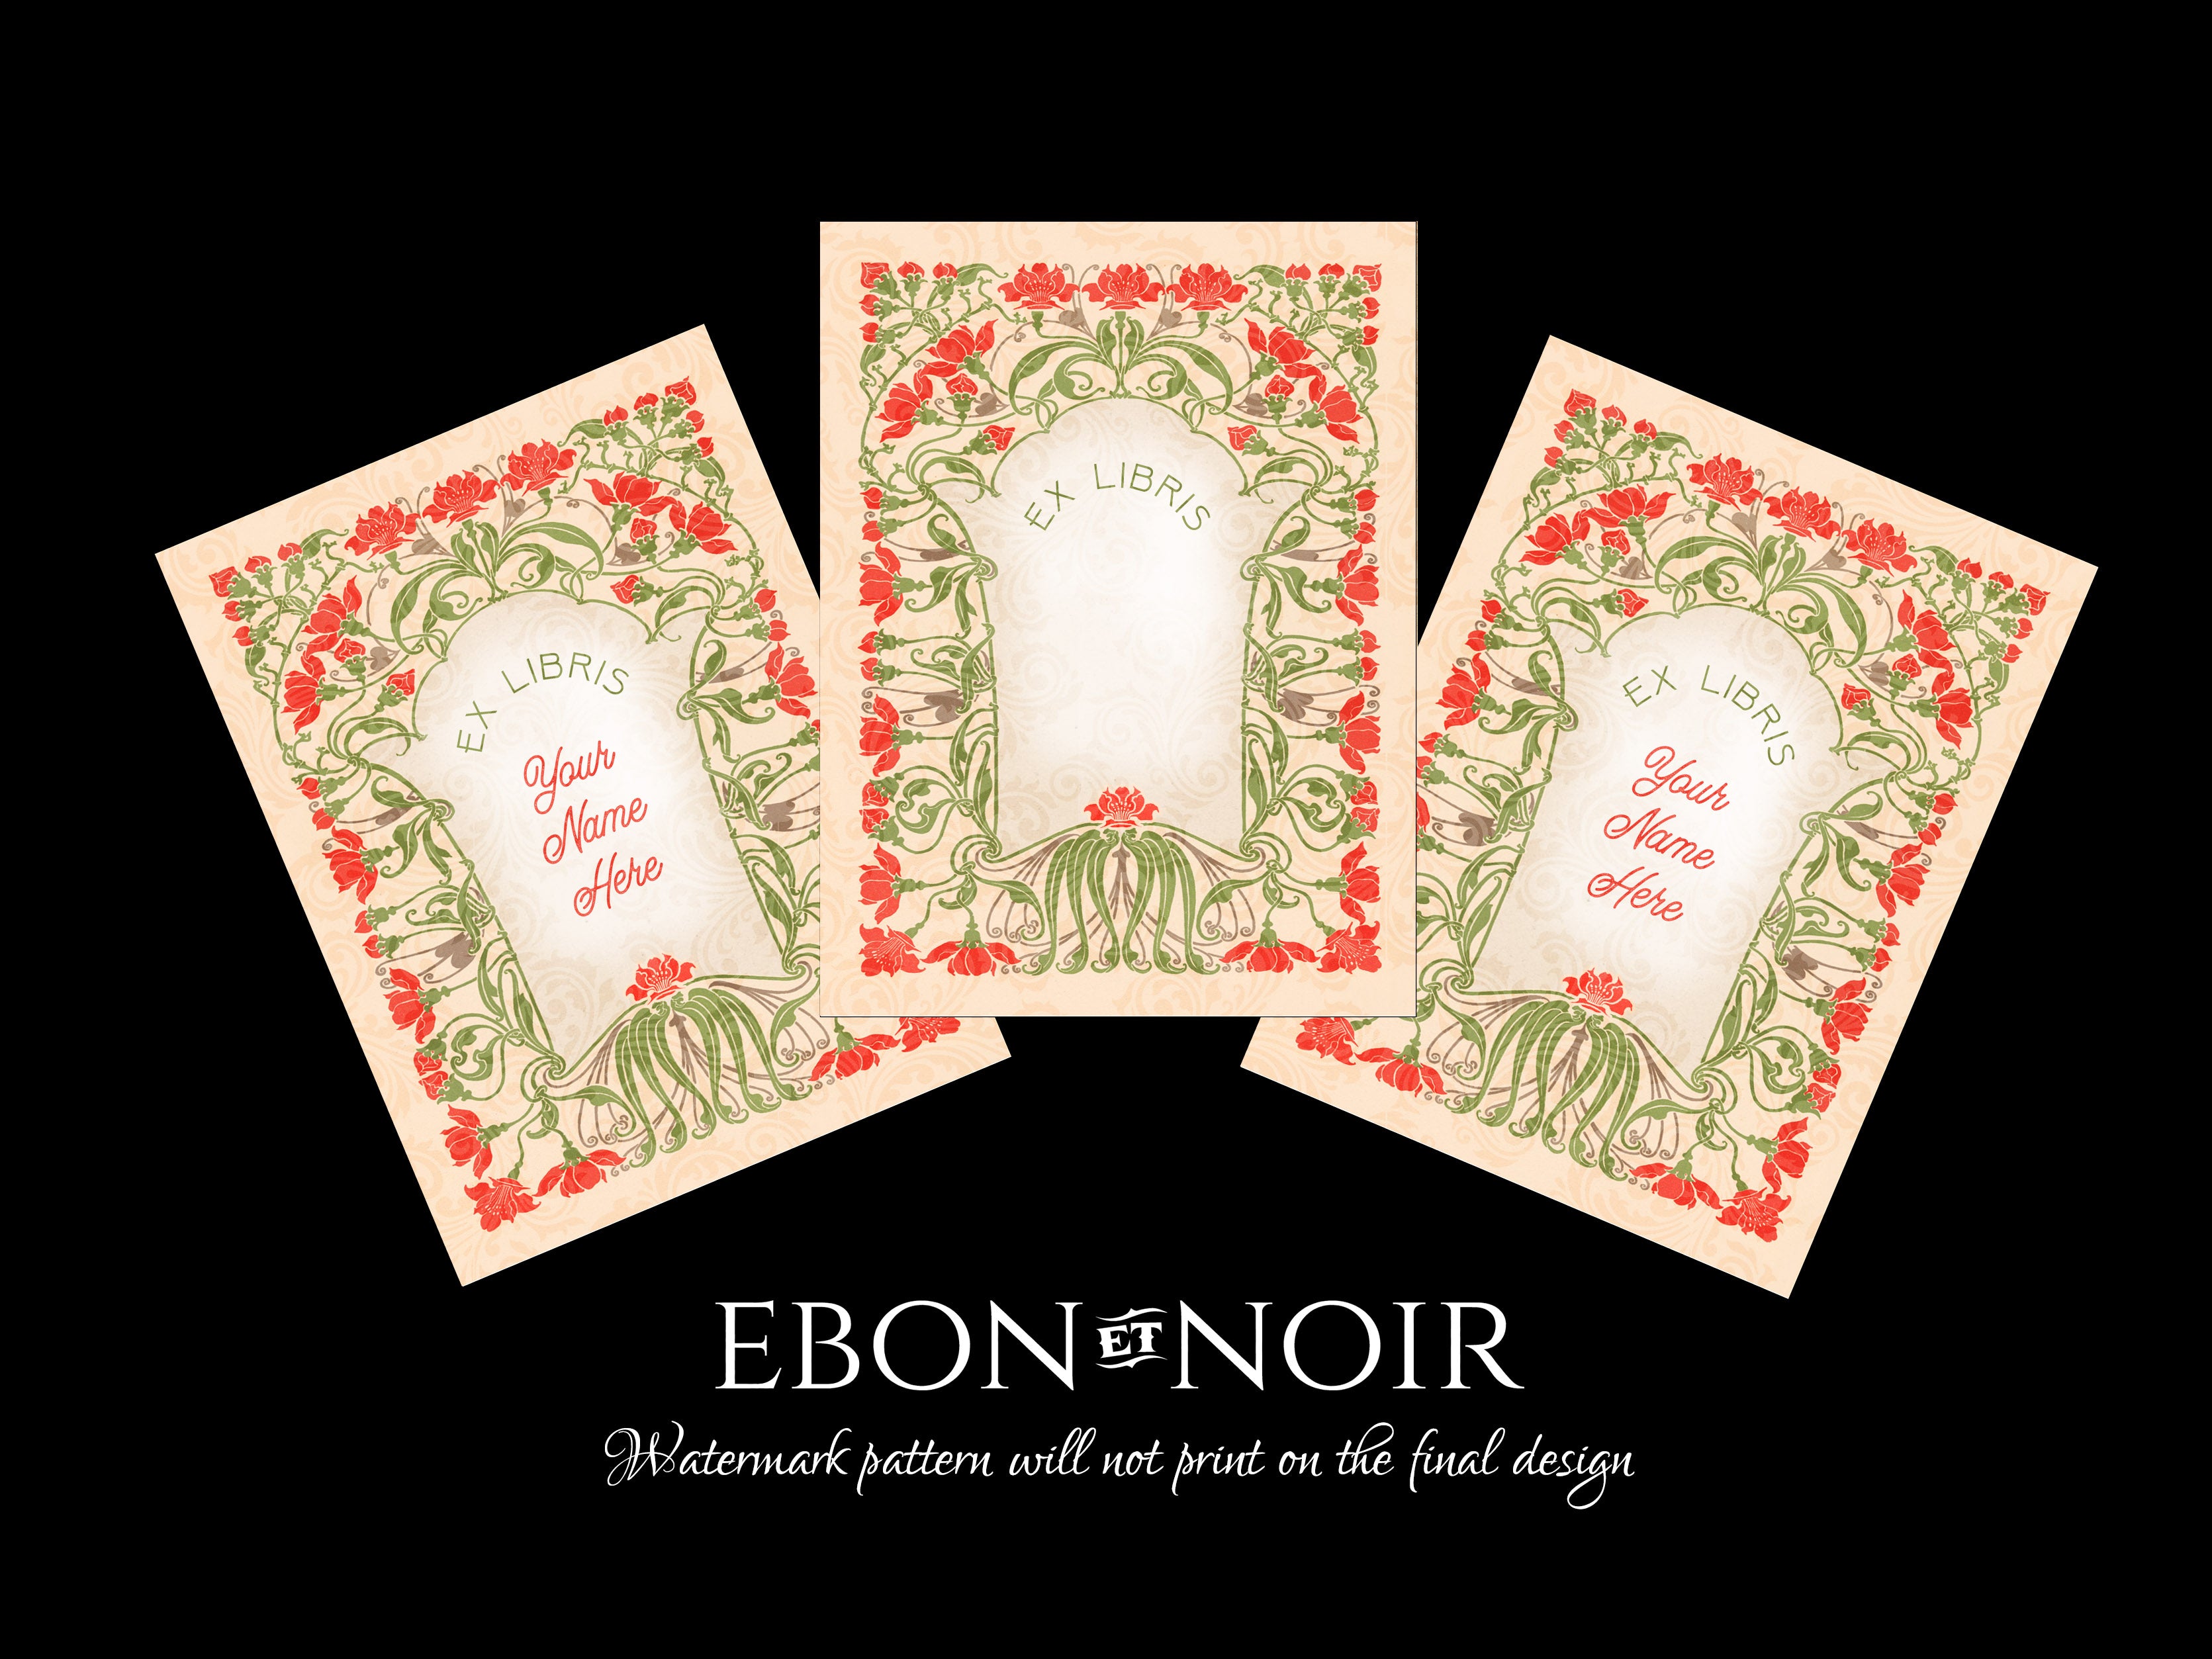 Art Deco Rose, Personalized Ex-Libris Bookplates, Crafted on Traditional Gummed Paper, 3in x 4in, Set of 30